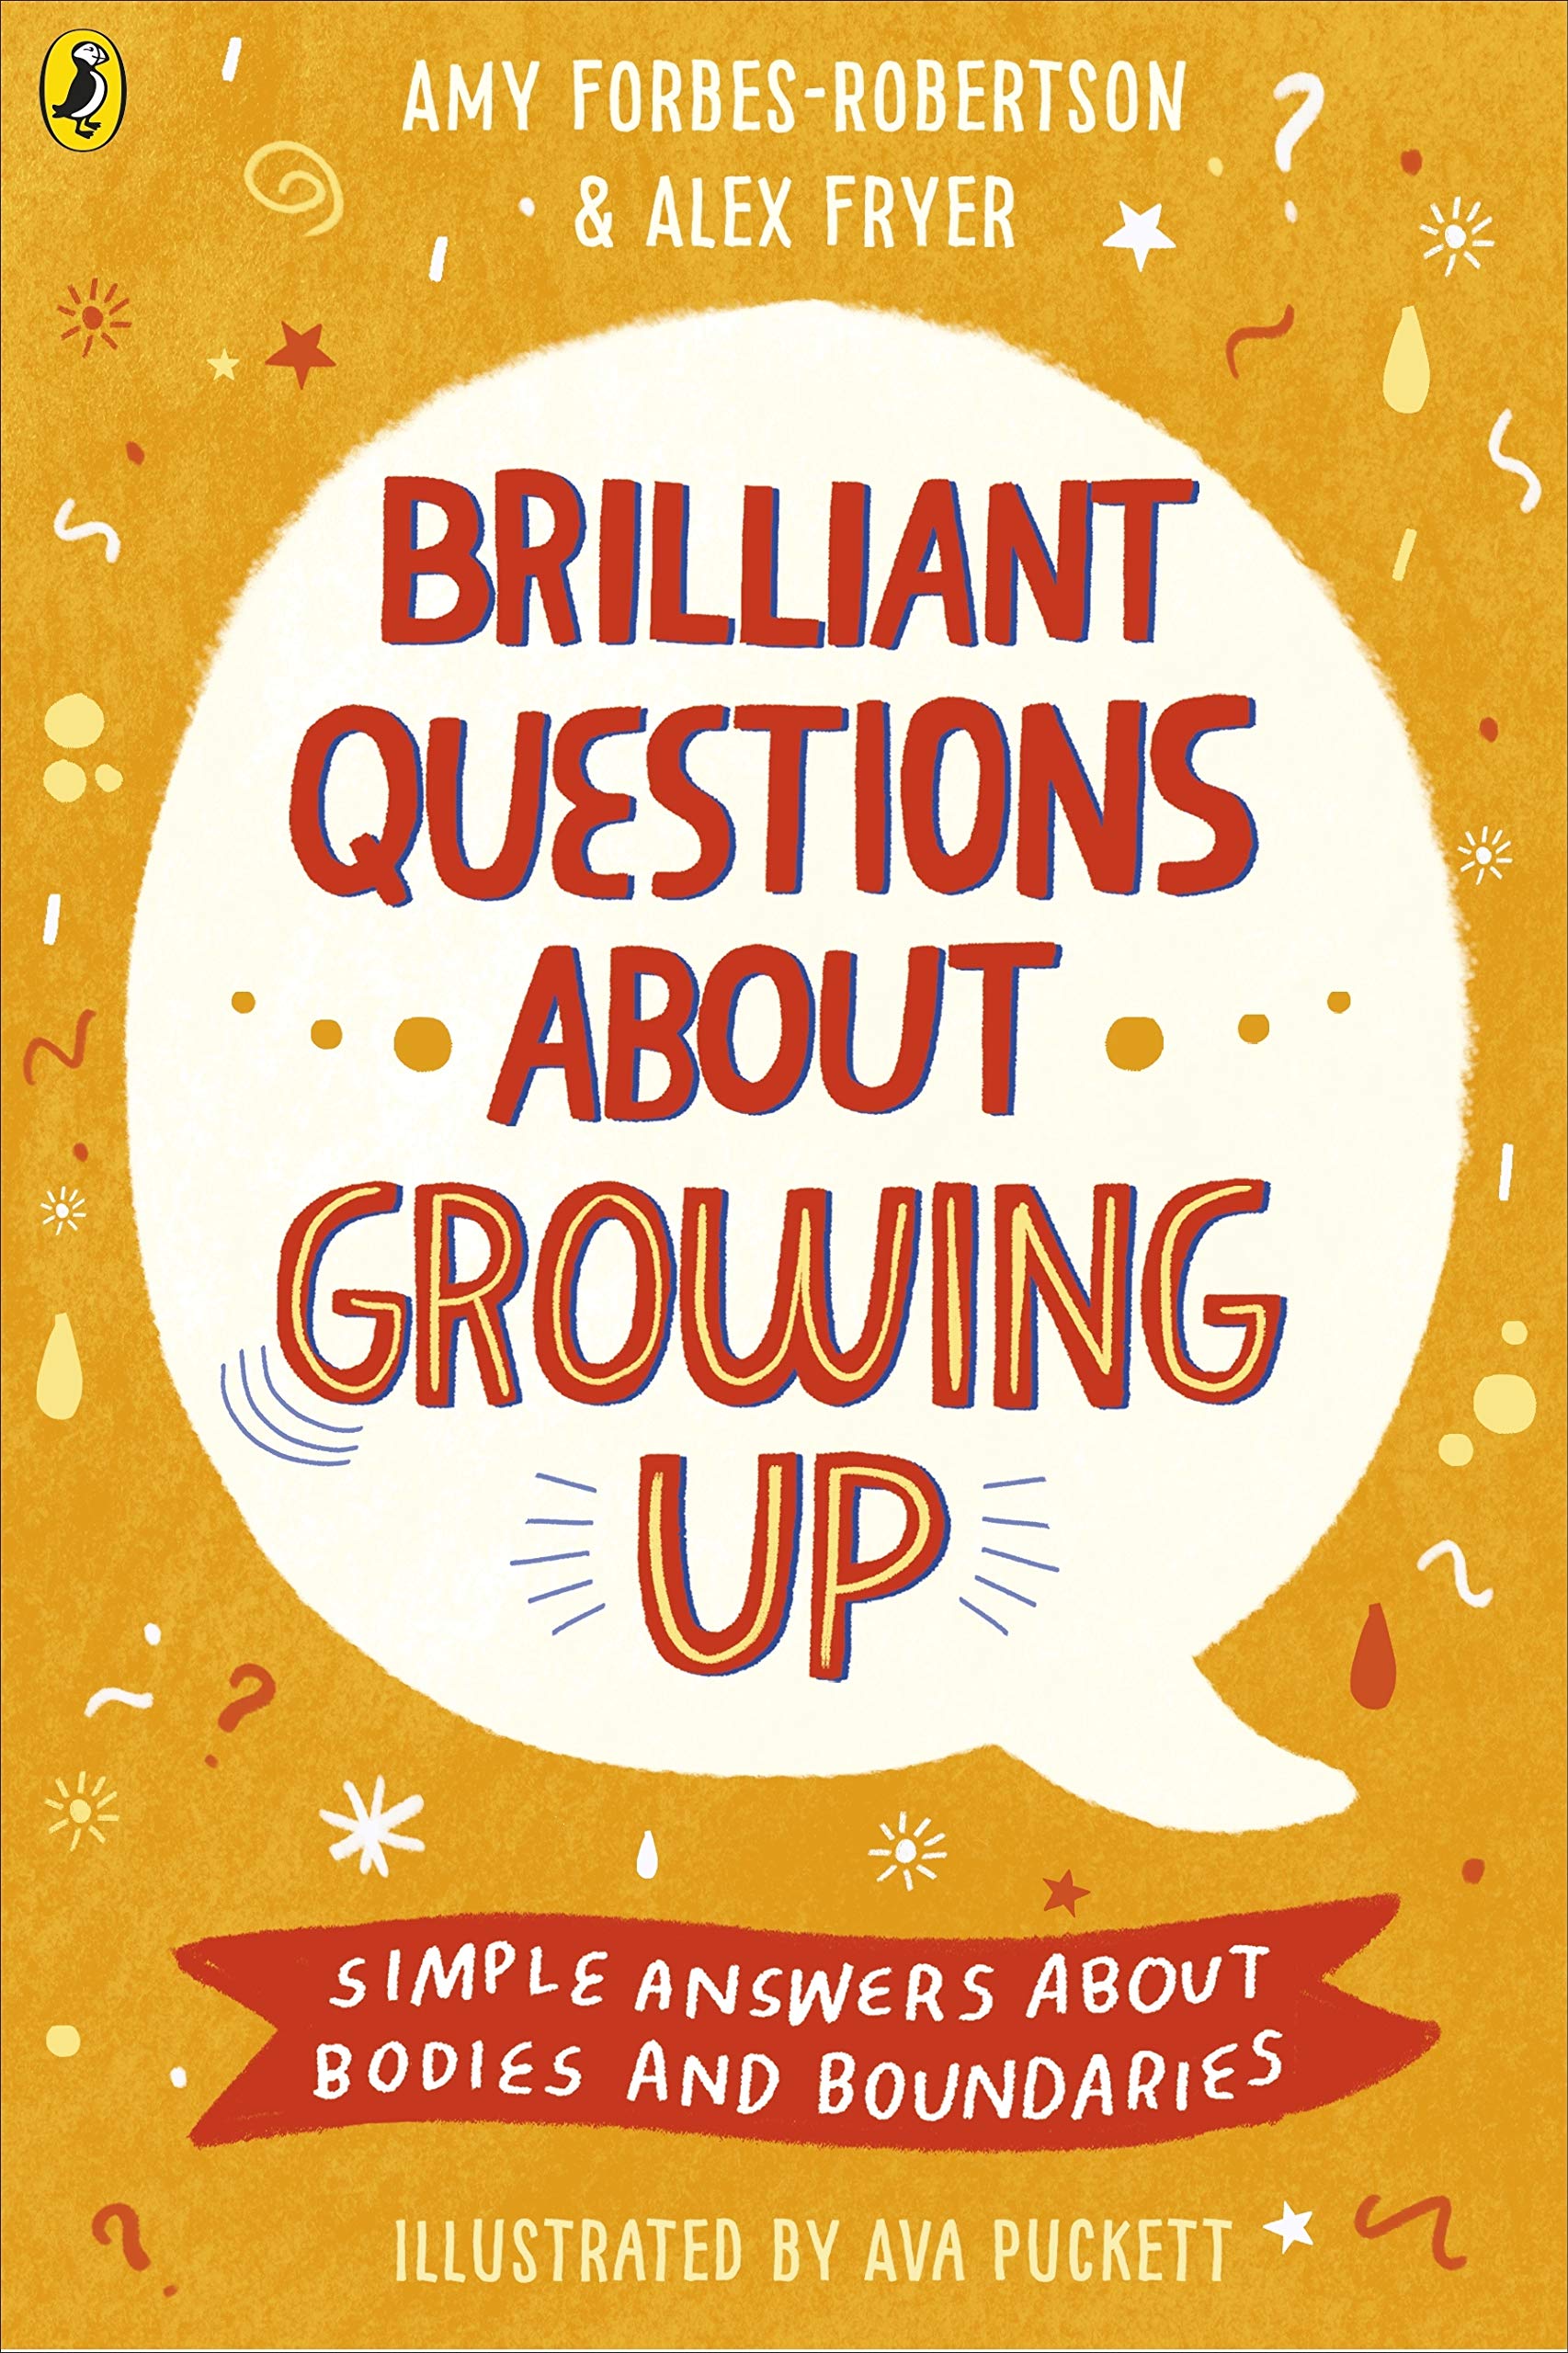 Brilliant Questions About Growing Up | Amy Forbes-Robertson, Alex Fryer